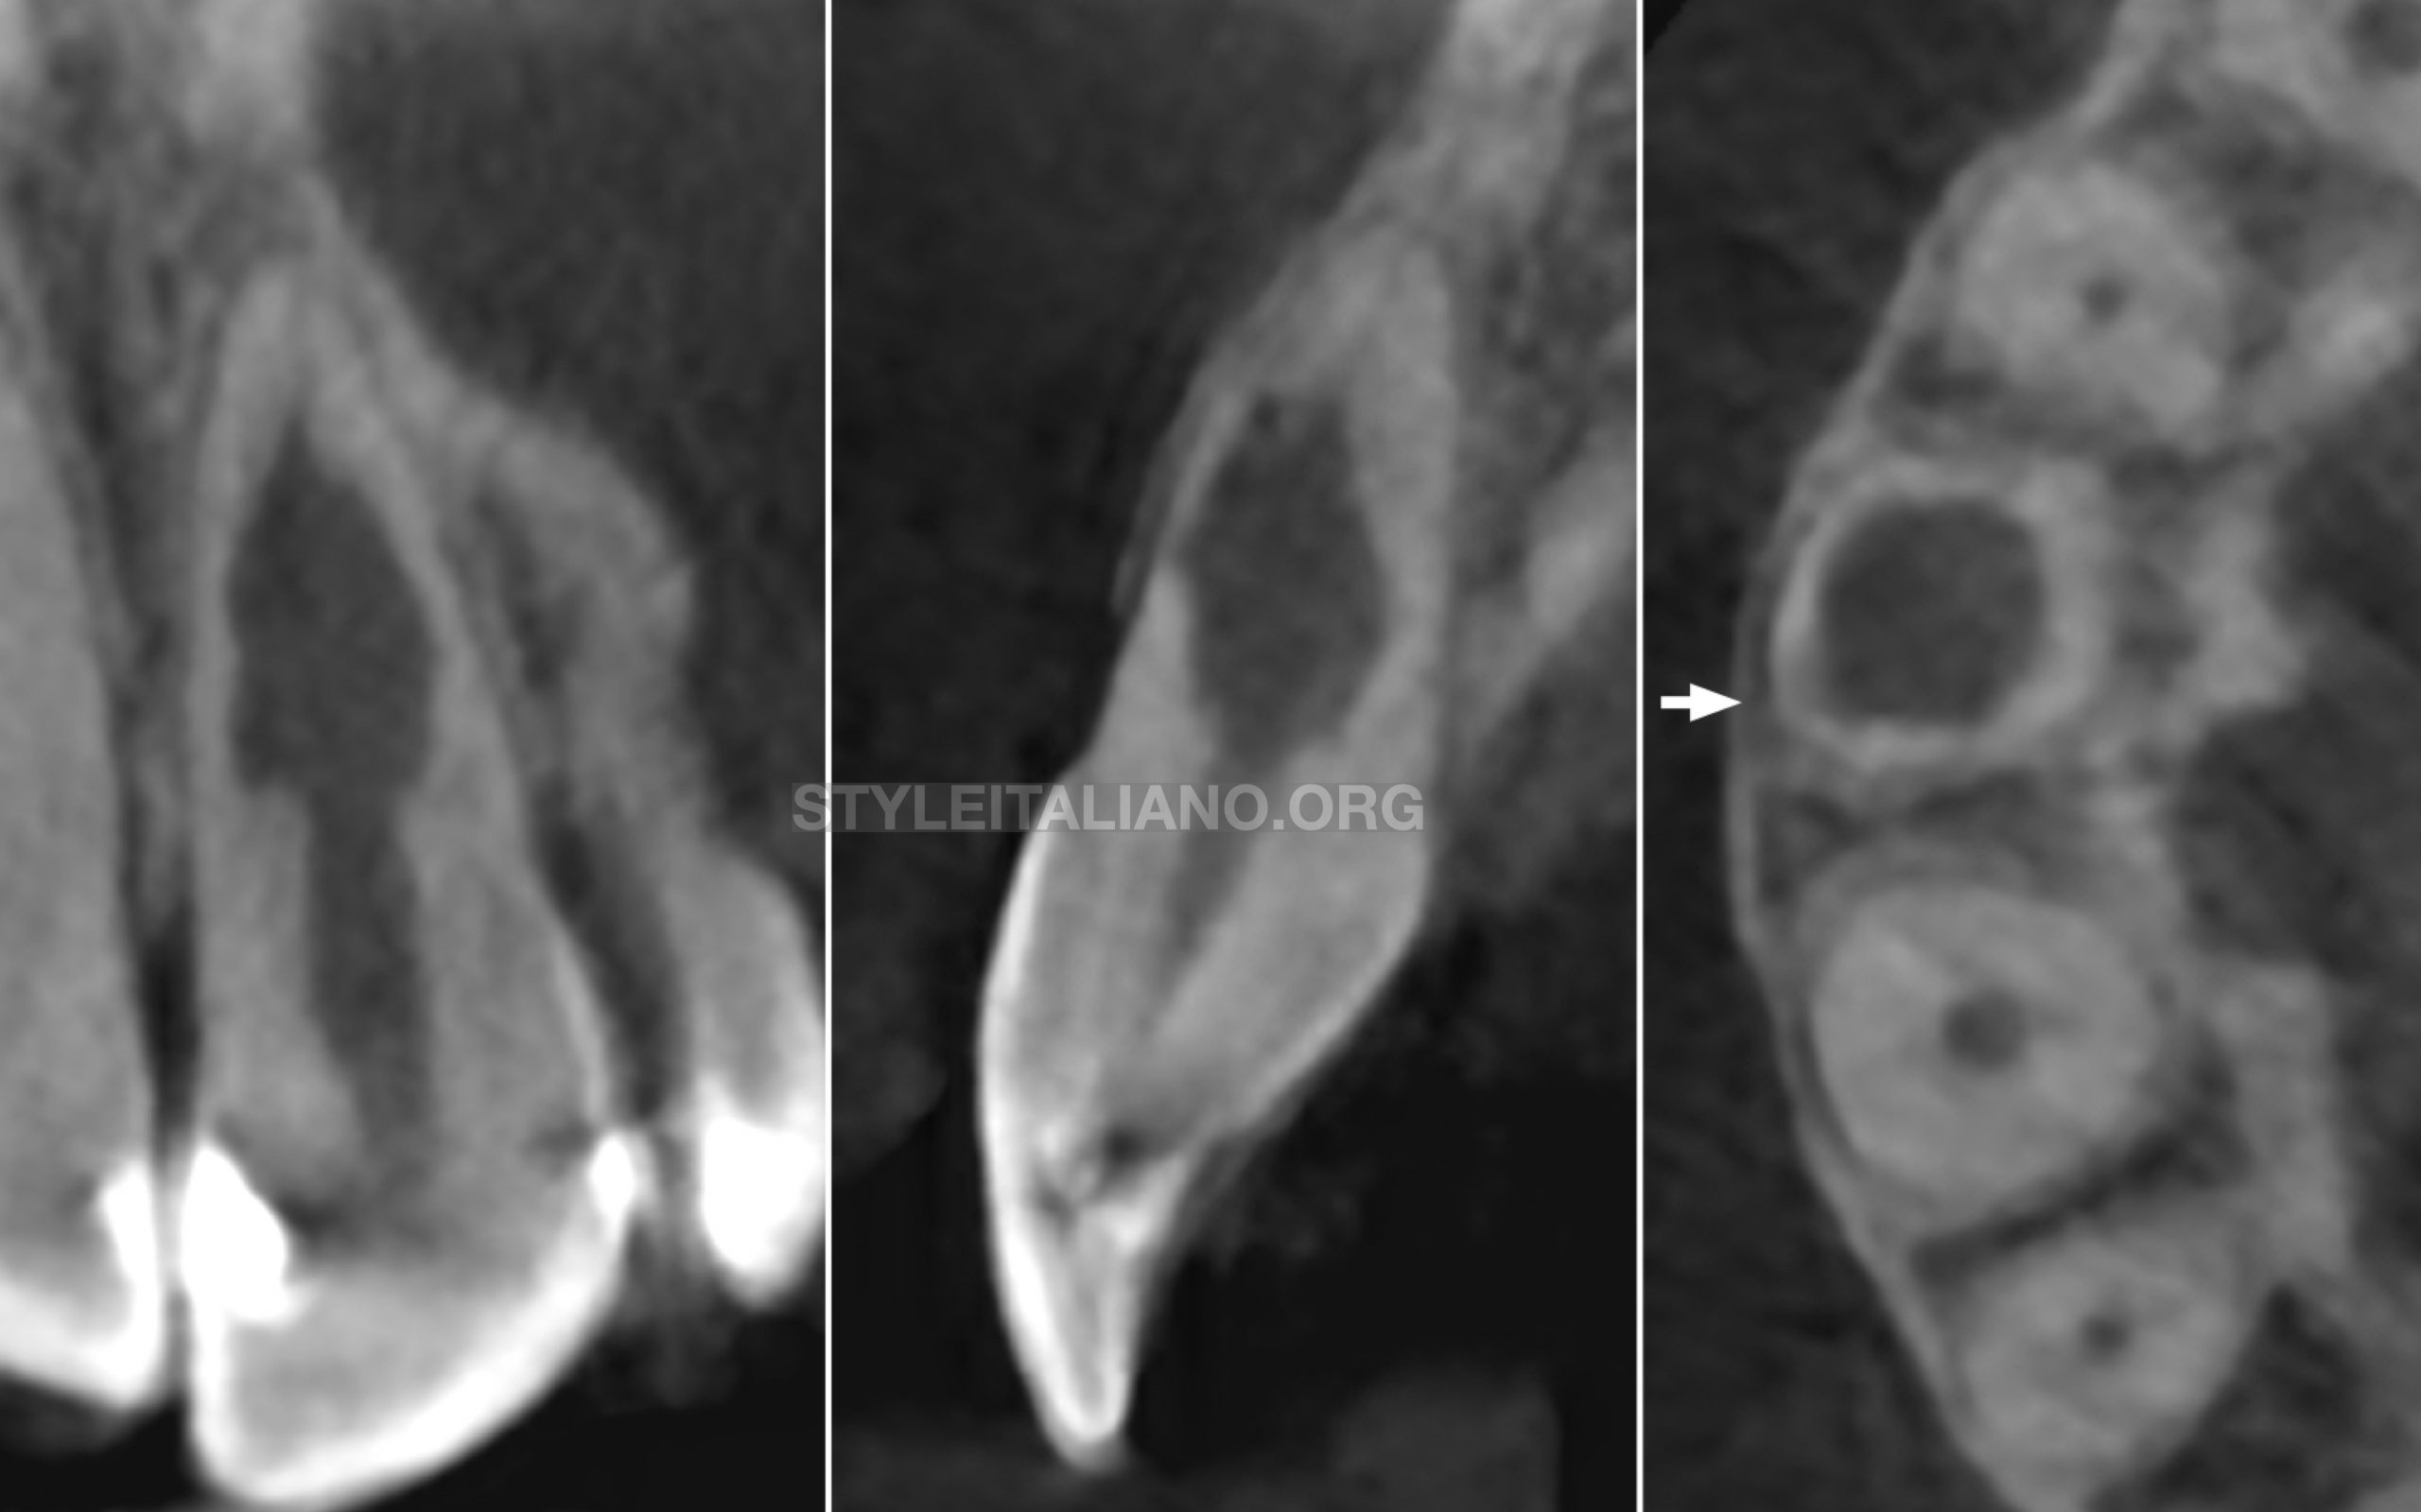 Management of a perforating internal inflammatory root resorption in a maxillary central incisor